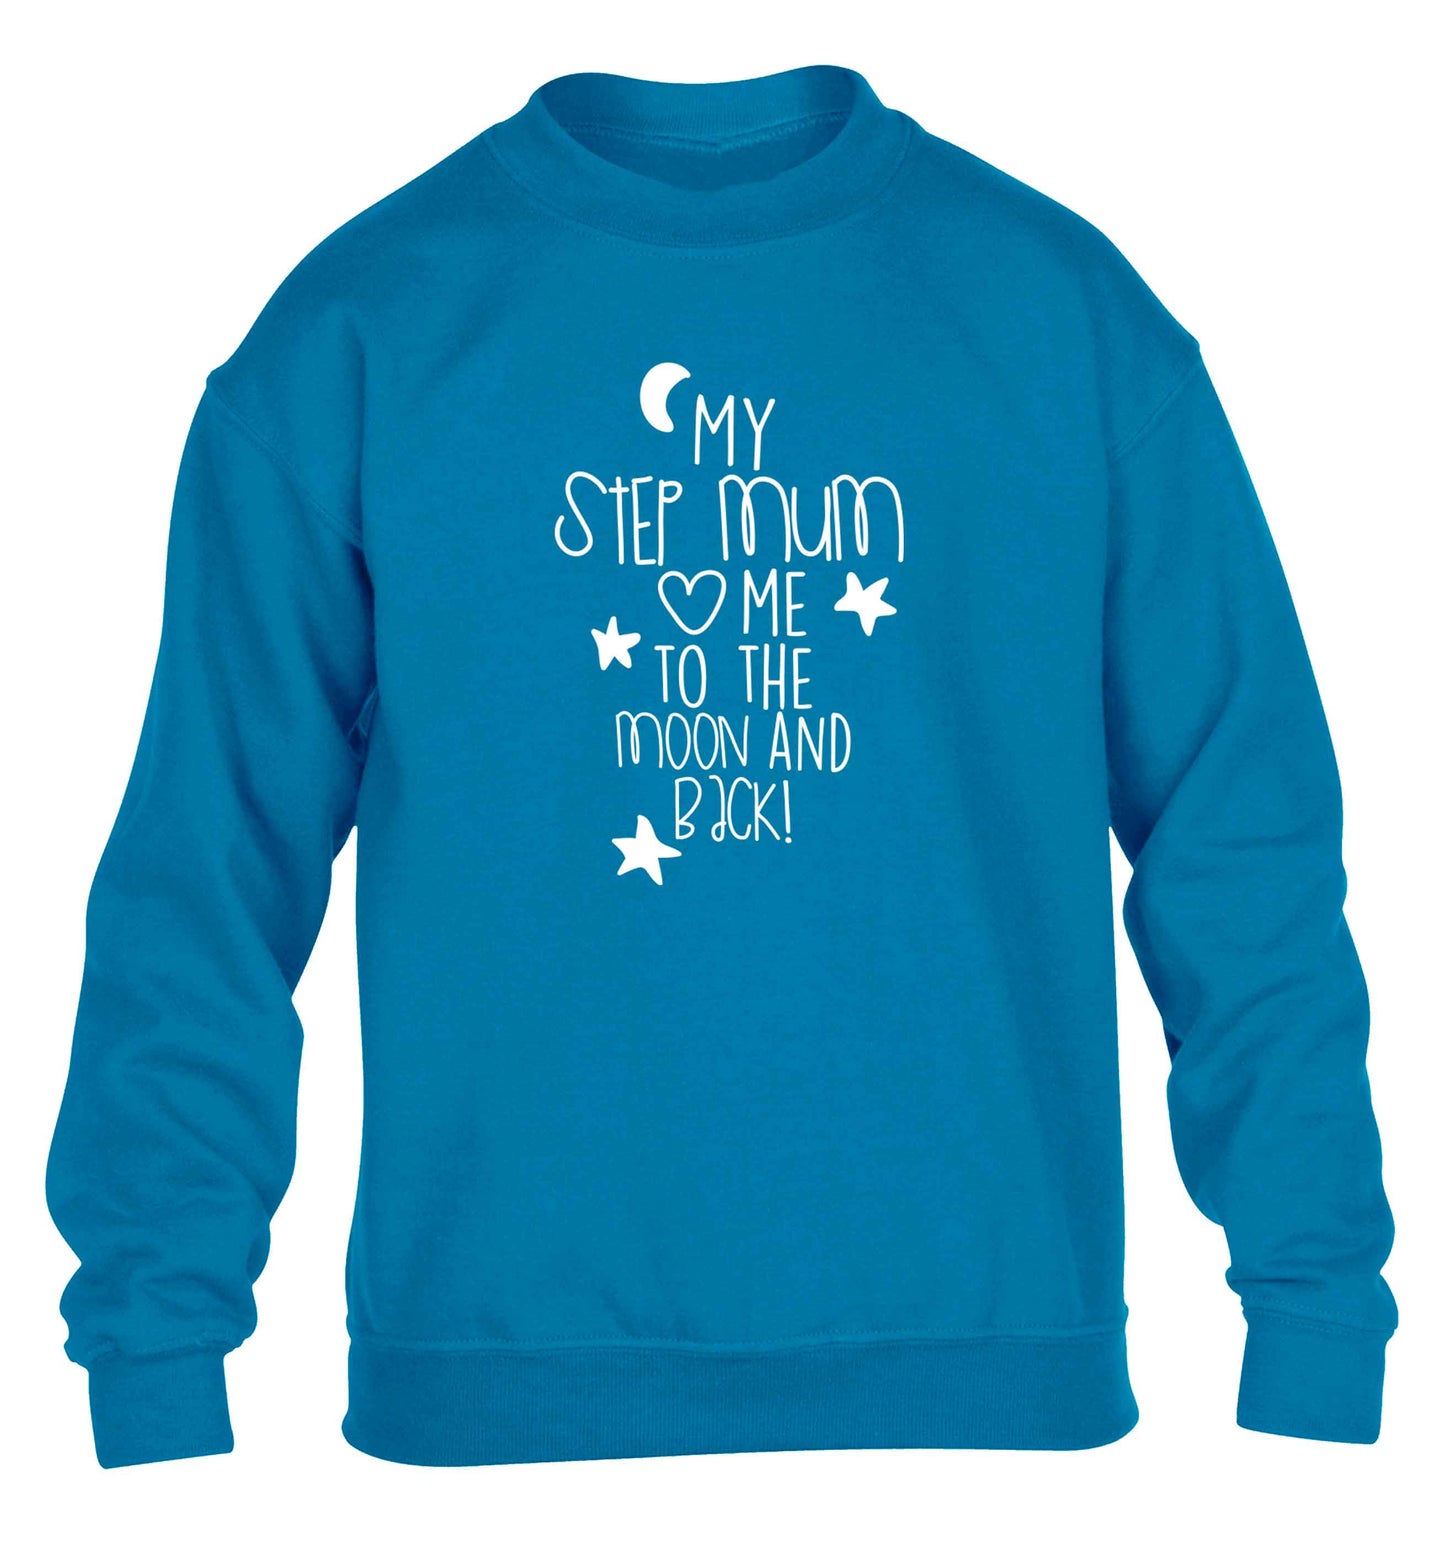 My step-mum loves me to the moon and back children's blue sweater 12-13 Years